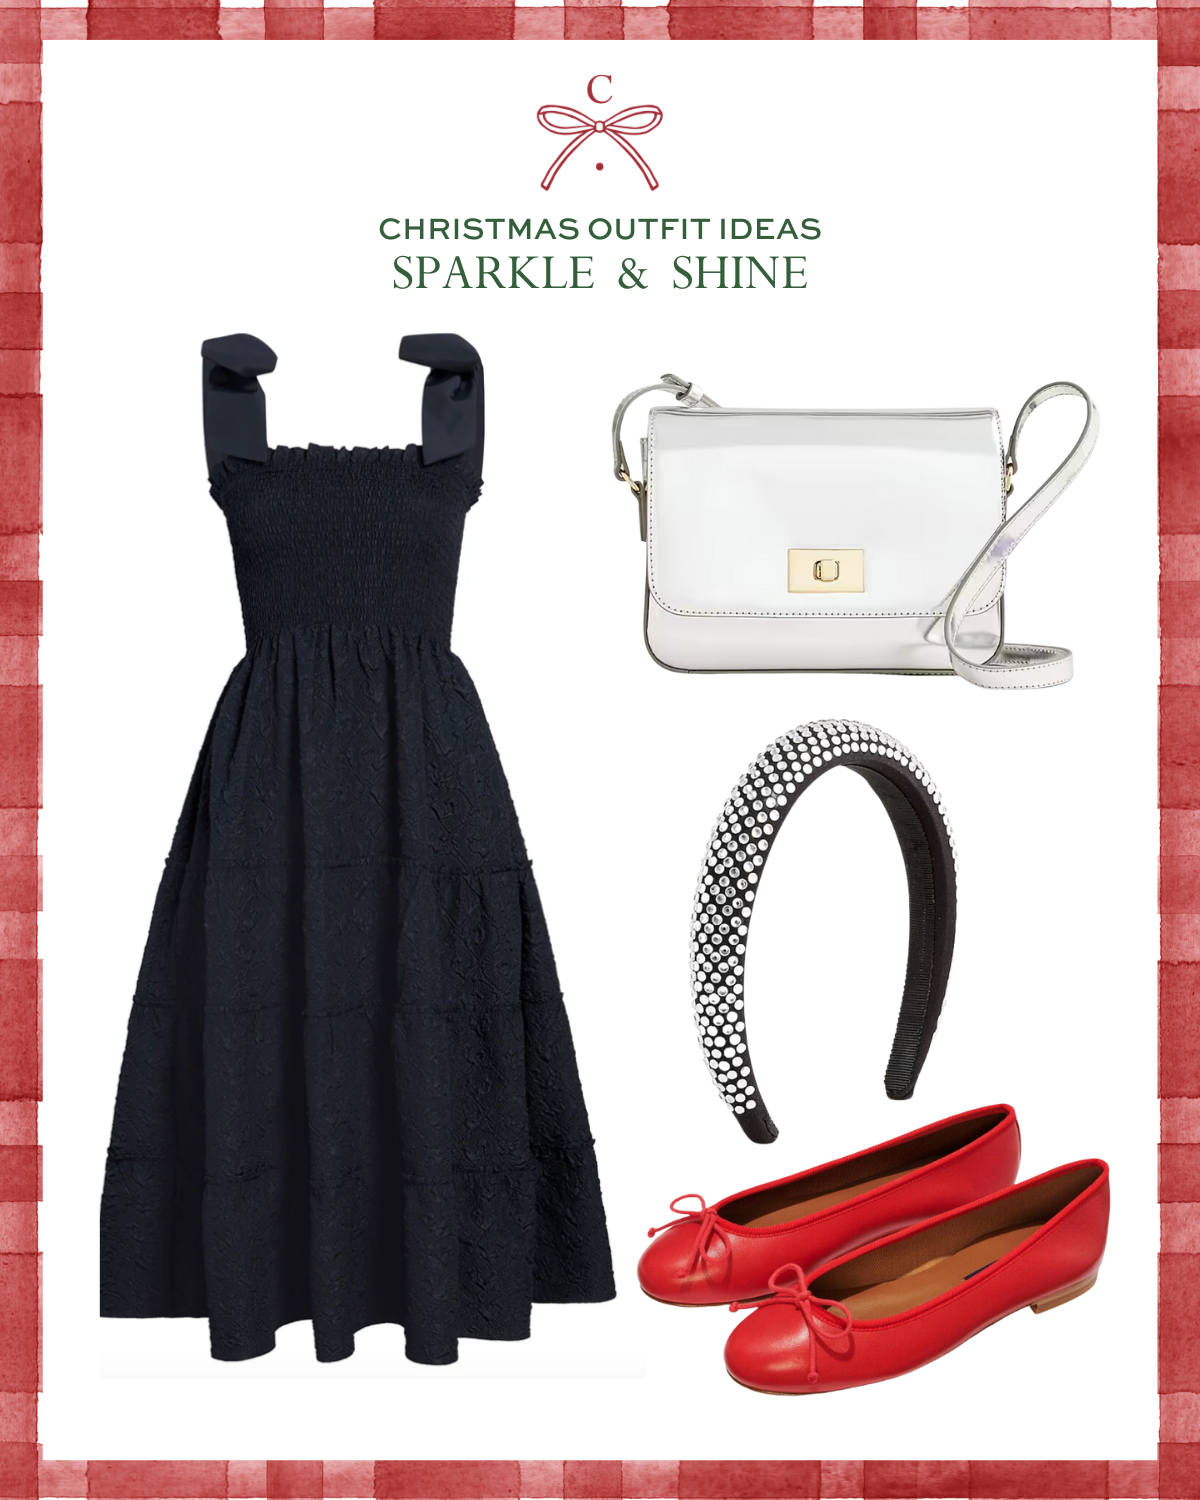 Christmas outfit ideas including Hill House Home Ribbon Ellie Nap Dress, Margaux Demi Ballet Flats, J.Crew Rhinestone-Studded Headband, and J.Crew Edie Leather Bag